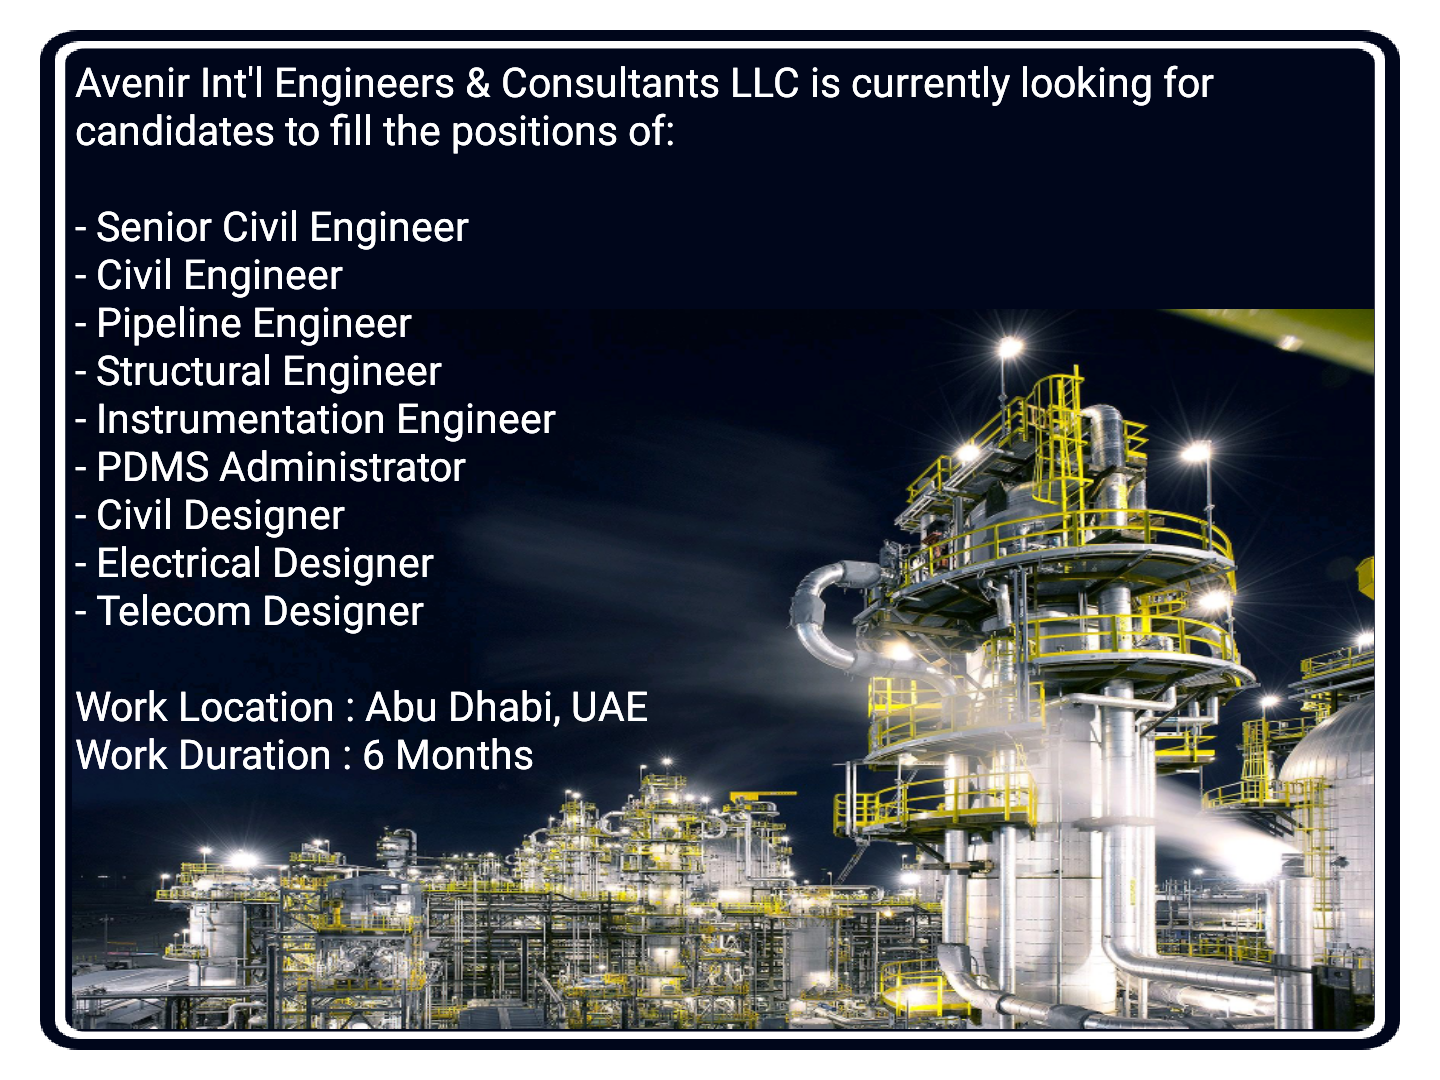 Civil, Instrumentation, Pipeline, Structural, Electrical & Telecom Engineer Jobs